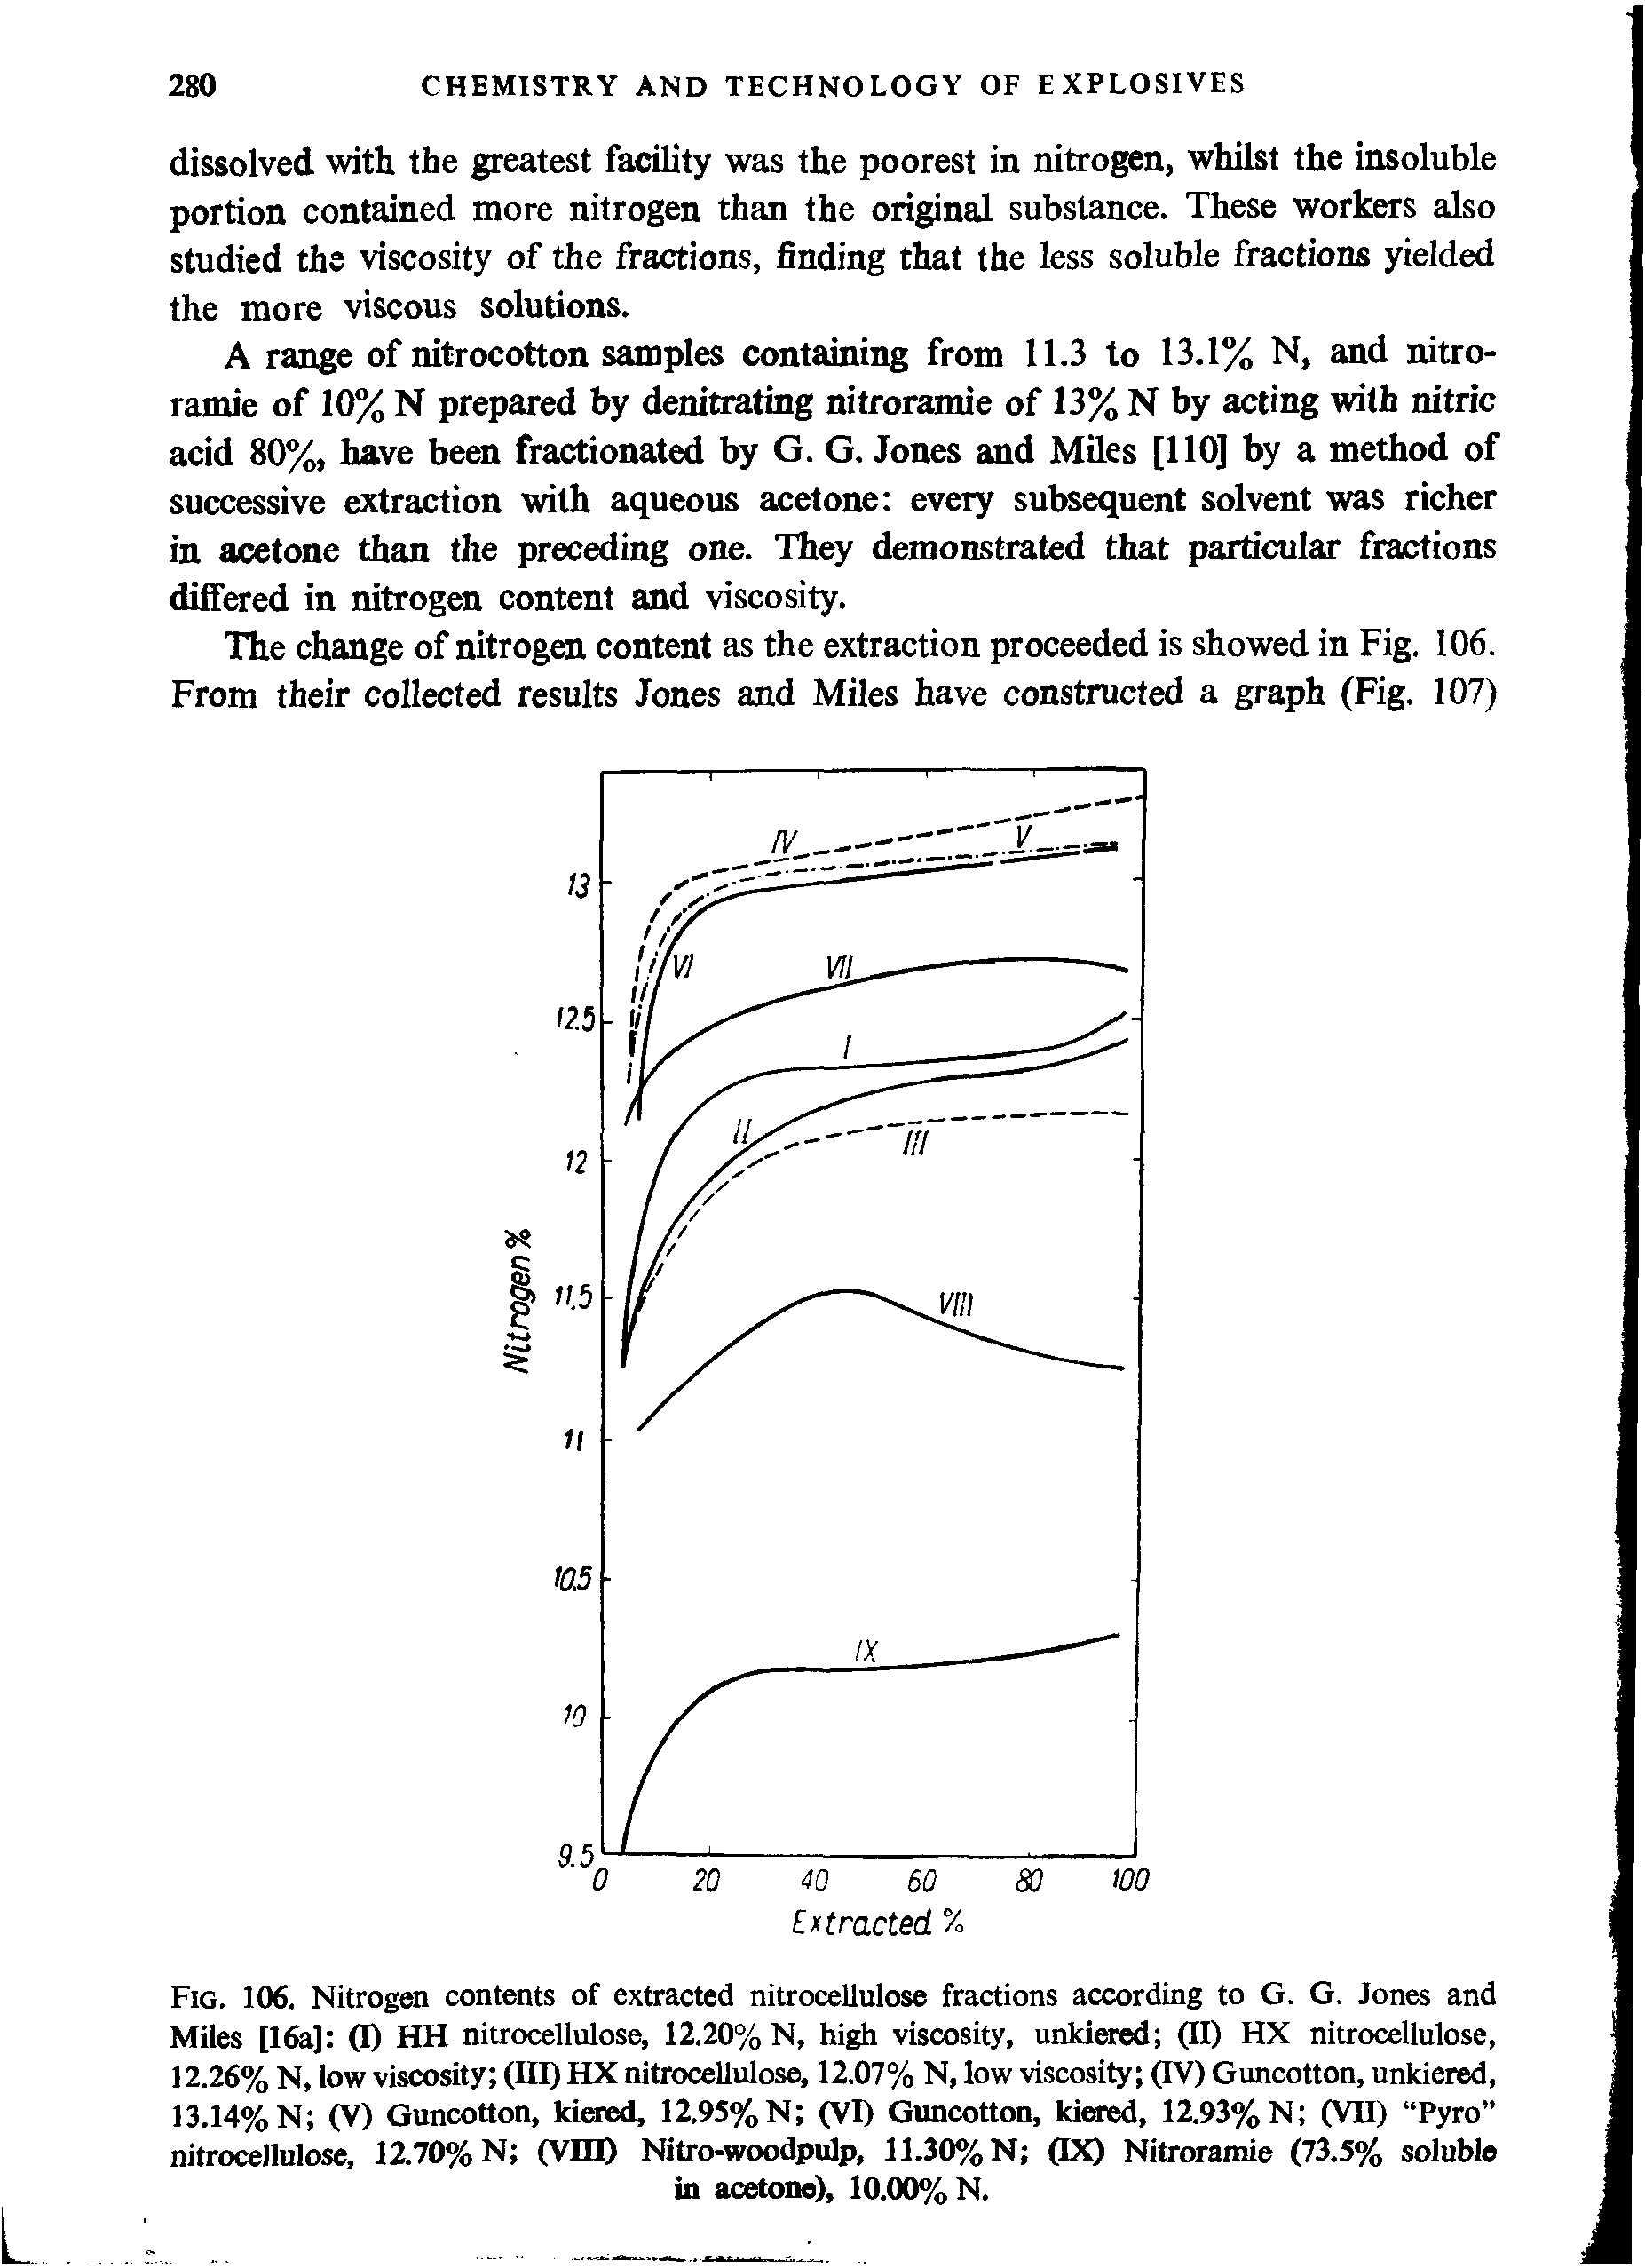 Fig. 106. Nitrogen contents of extracted nitrocellulose fractions according to G. G. Jones and Miles [16a] CO HH nitrocellulose, 12.20% N, high viscosity, unkiered (II) HX nitrocellulose, 12.26% N, low viscosity (III) HX nitrocellulose, 12.07% N, low viscosity (IV) Guncotton, unkiered, 13.14% N (V) Guncotton, kiered, 12.95% N (VI) Guncotton, kiered, 12.93% N (VII) Pyro nitrocellulose, 12.70% N (VUI) Nitro-woodpulp, 11.30% N (IX) Nitroramie (73.5% soluble...